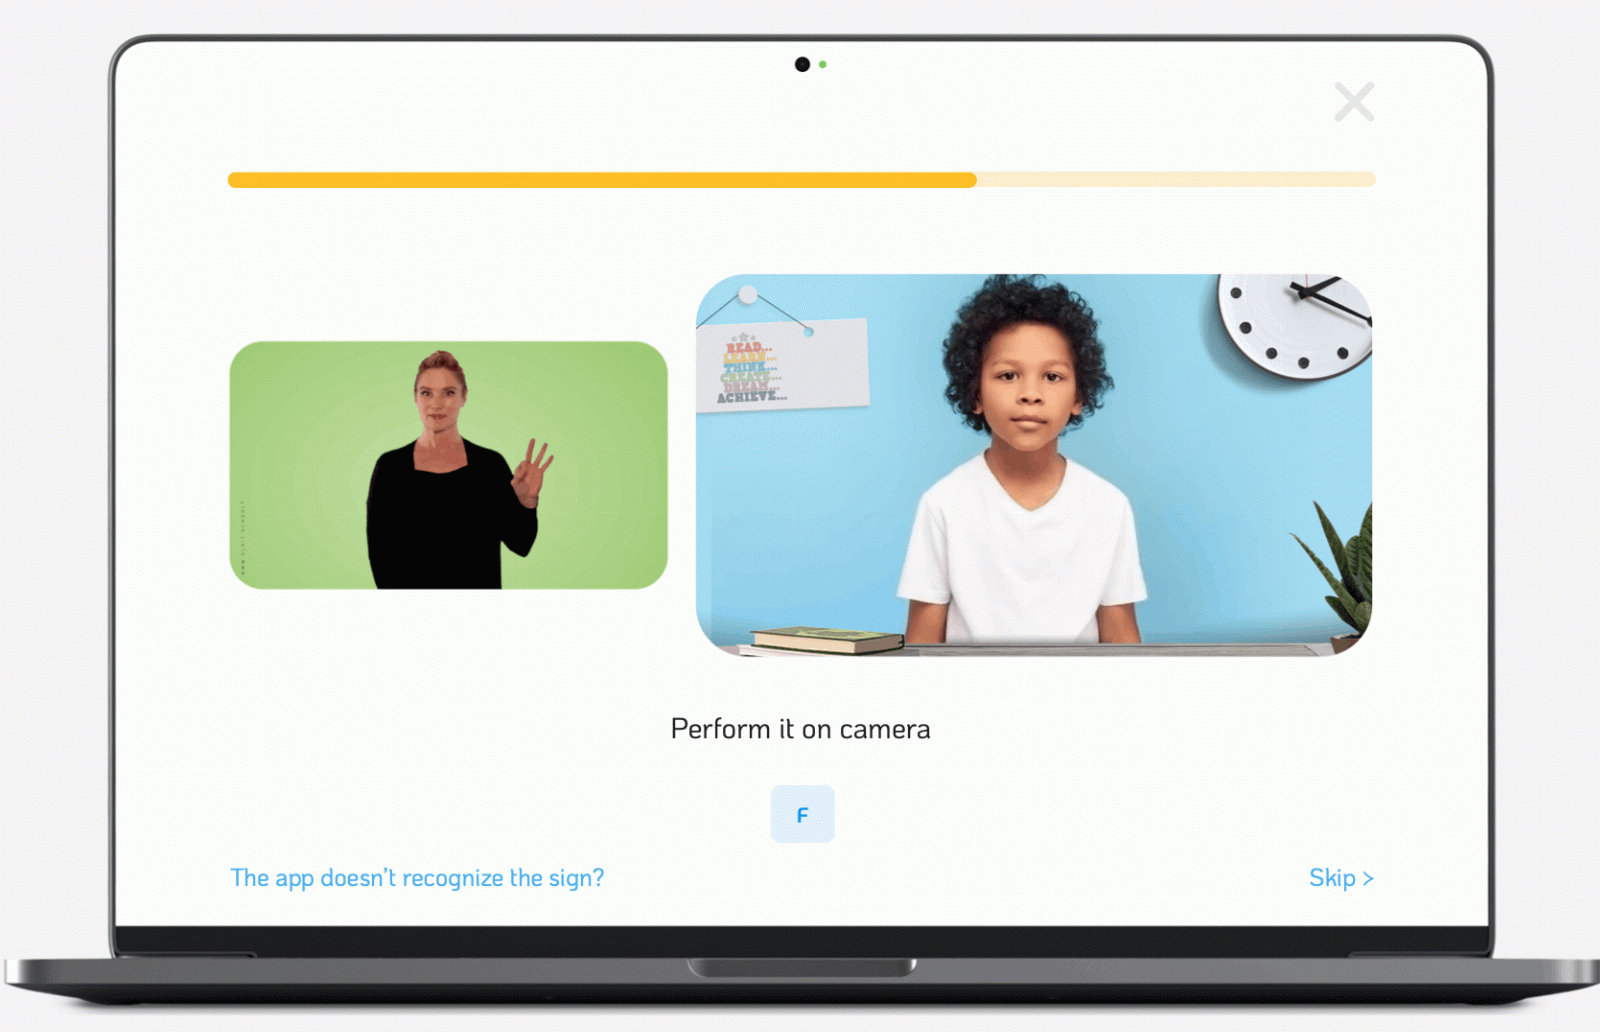 SLAIT pivots from translating sign language to AI-powered interactive lessons